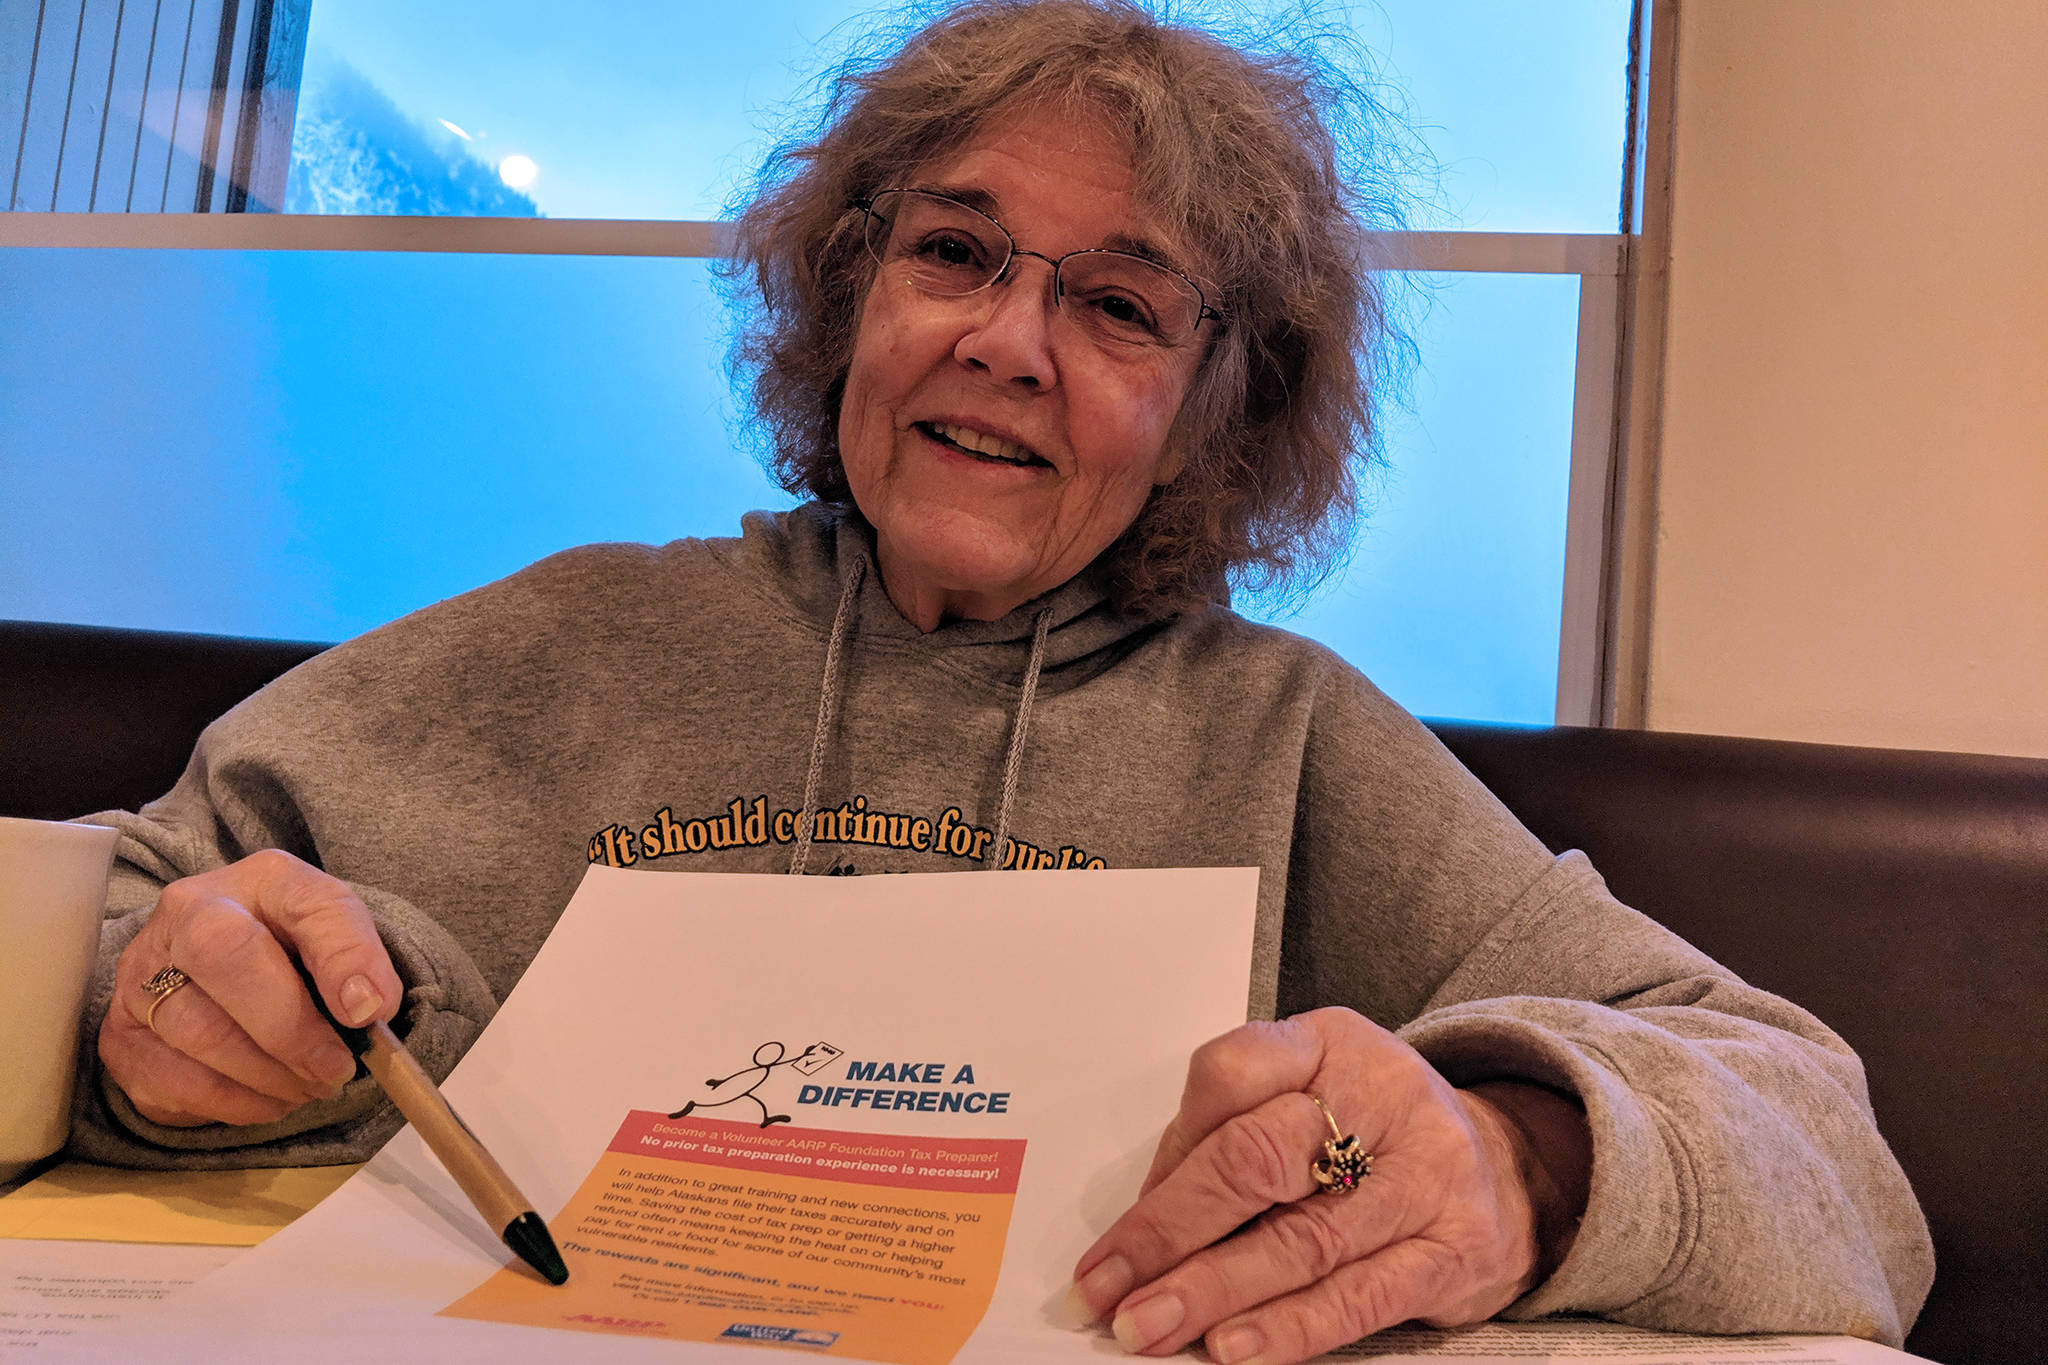 Nora Laughlin, who has volunteered for the AARP Foundation’s Tax-Aide program for over a decade says volunteers for the free tax preparation help service are needed in Juneau. (Ben Hohenstatt | Capital City Weekly)